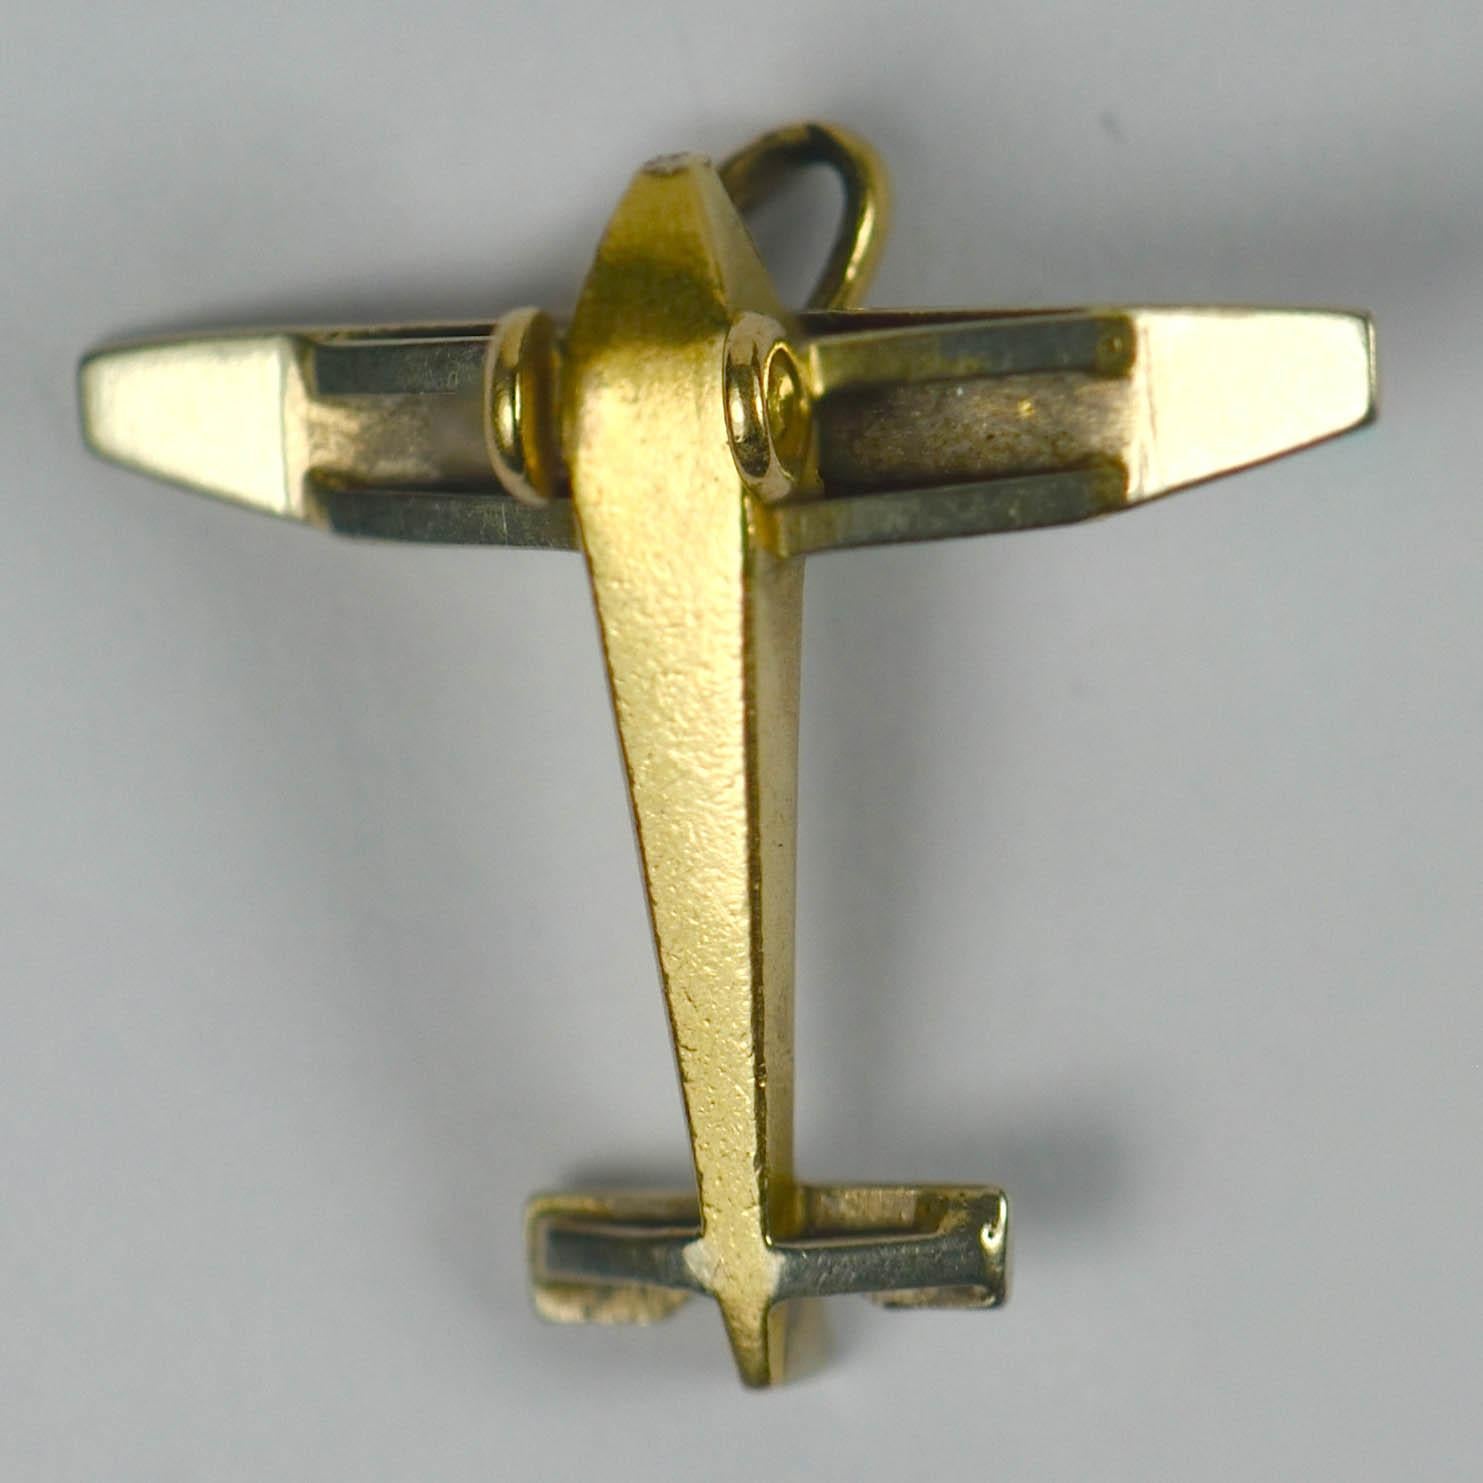 The perfect gift for a traveller or anyone in the aviation world, this French 18 karat yellow and white gold airplane charm is a rare and special thing. 2/3